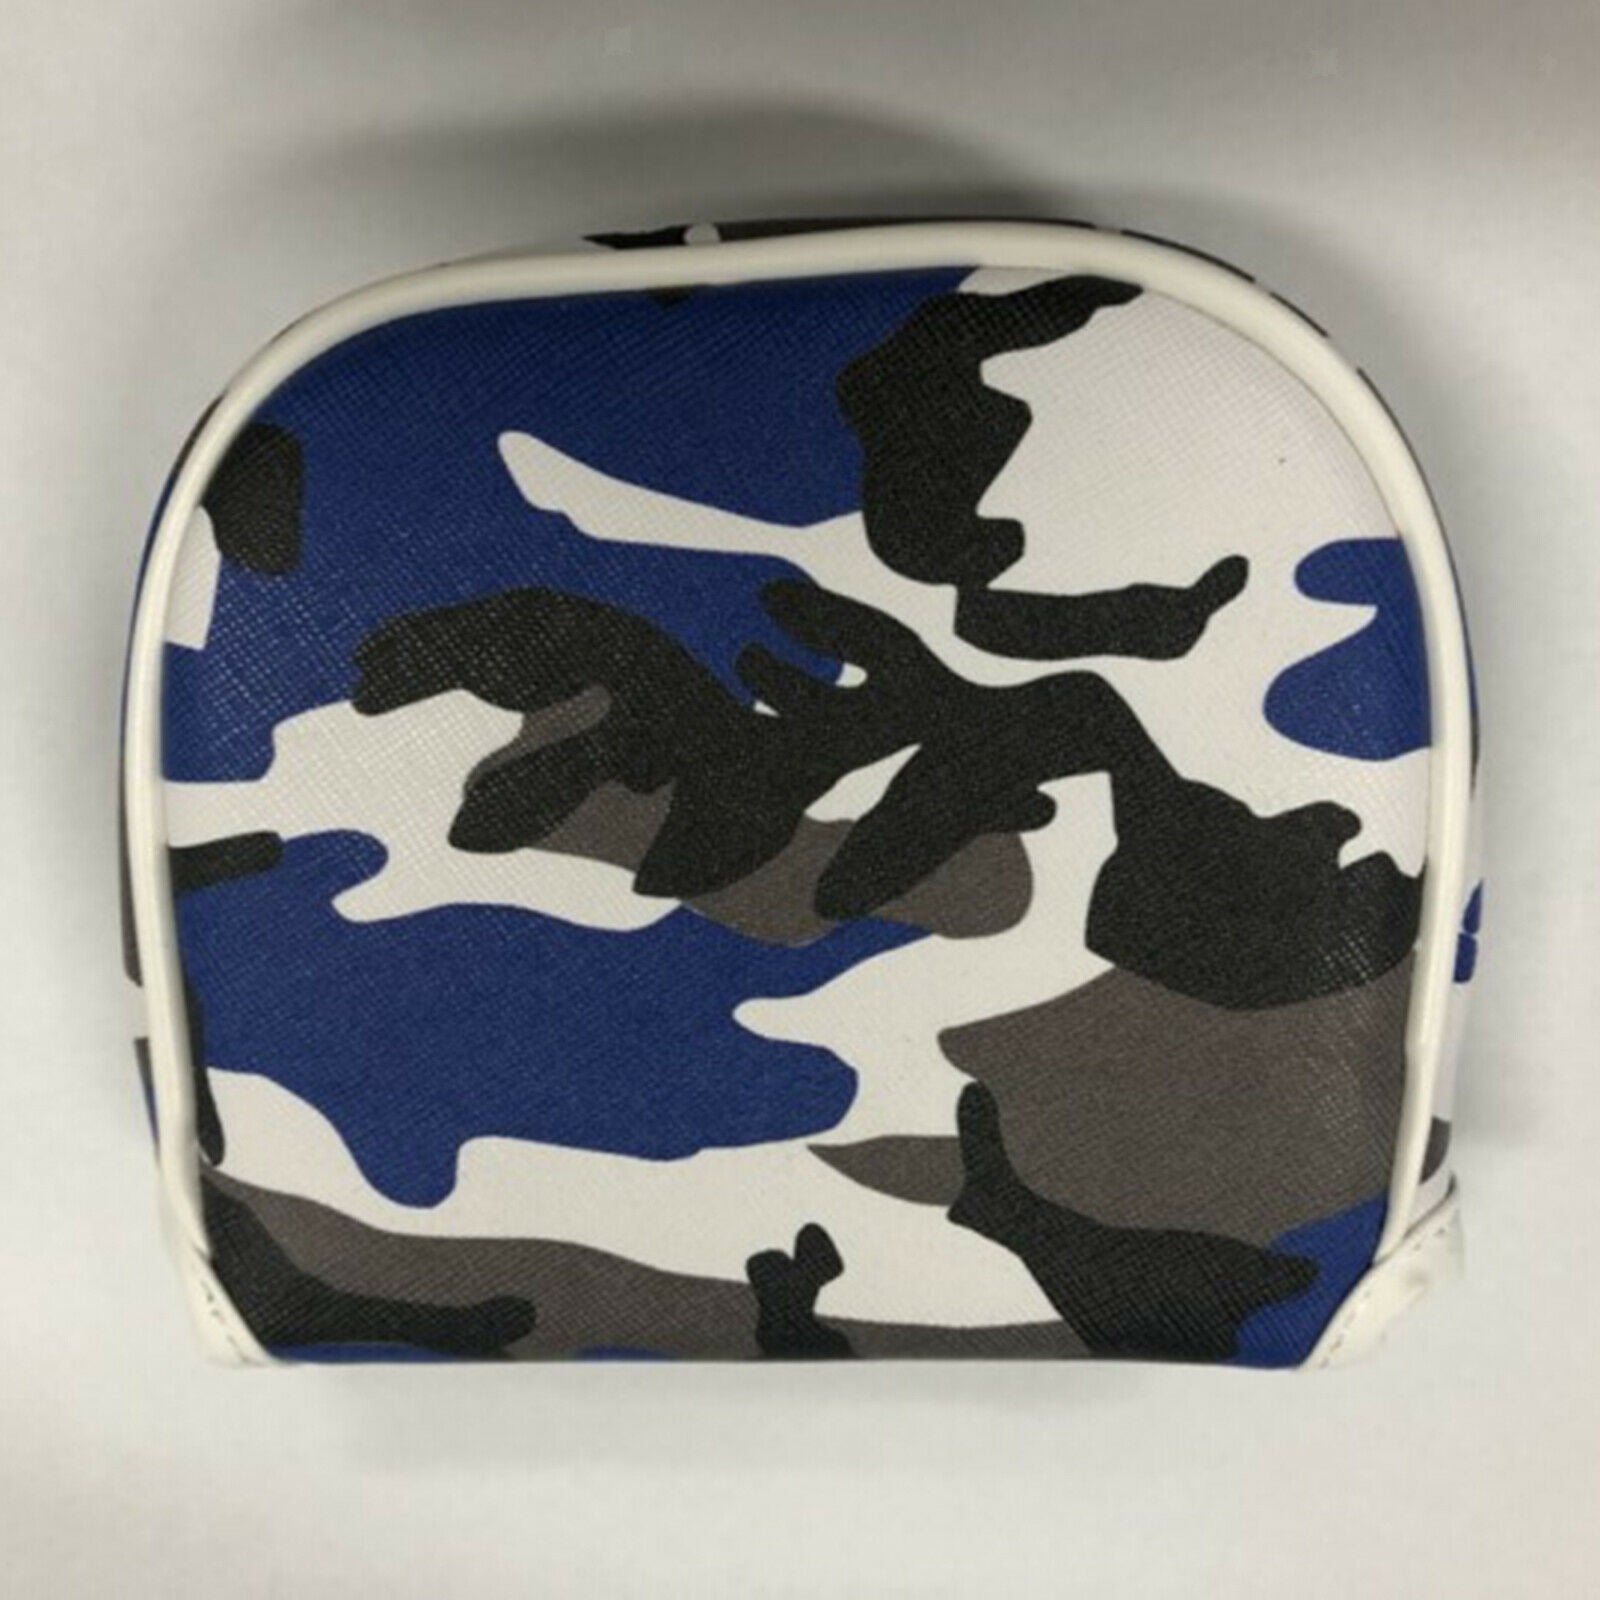 Camouflage Blue Golf Mallet Putter Cover Headcover, Universal Fits